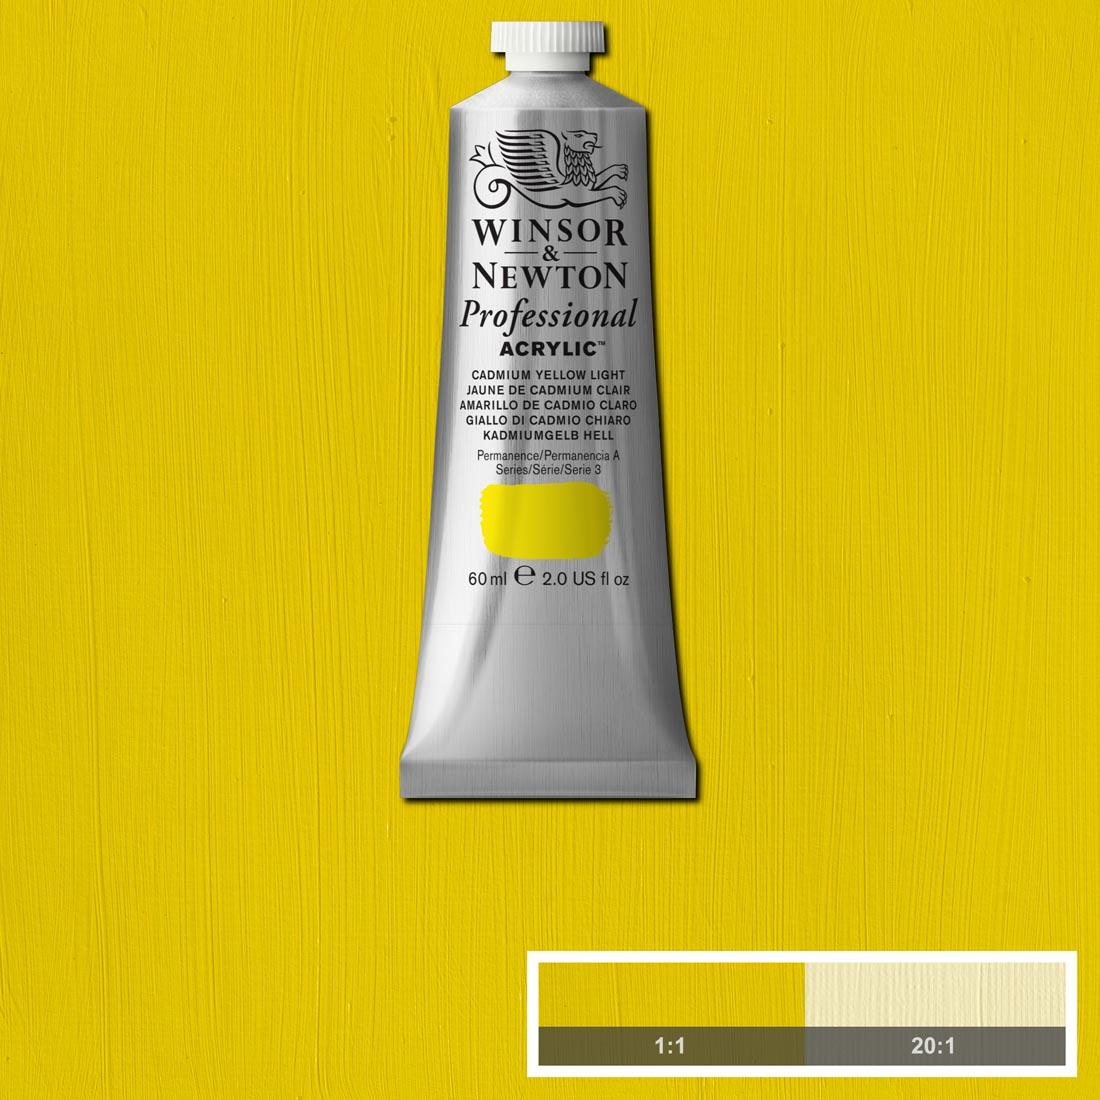 tube of Winsor and Newton Professional Acrylic Cadmium Yellow Light with paint swatch in the background